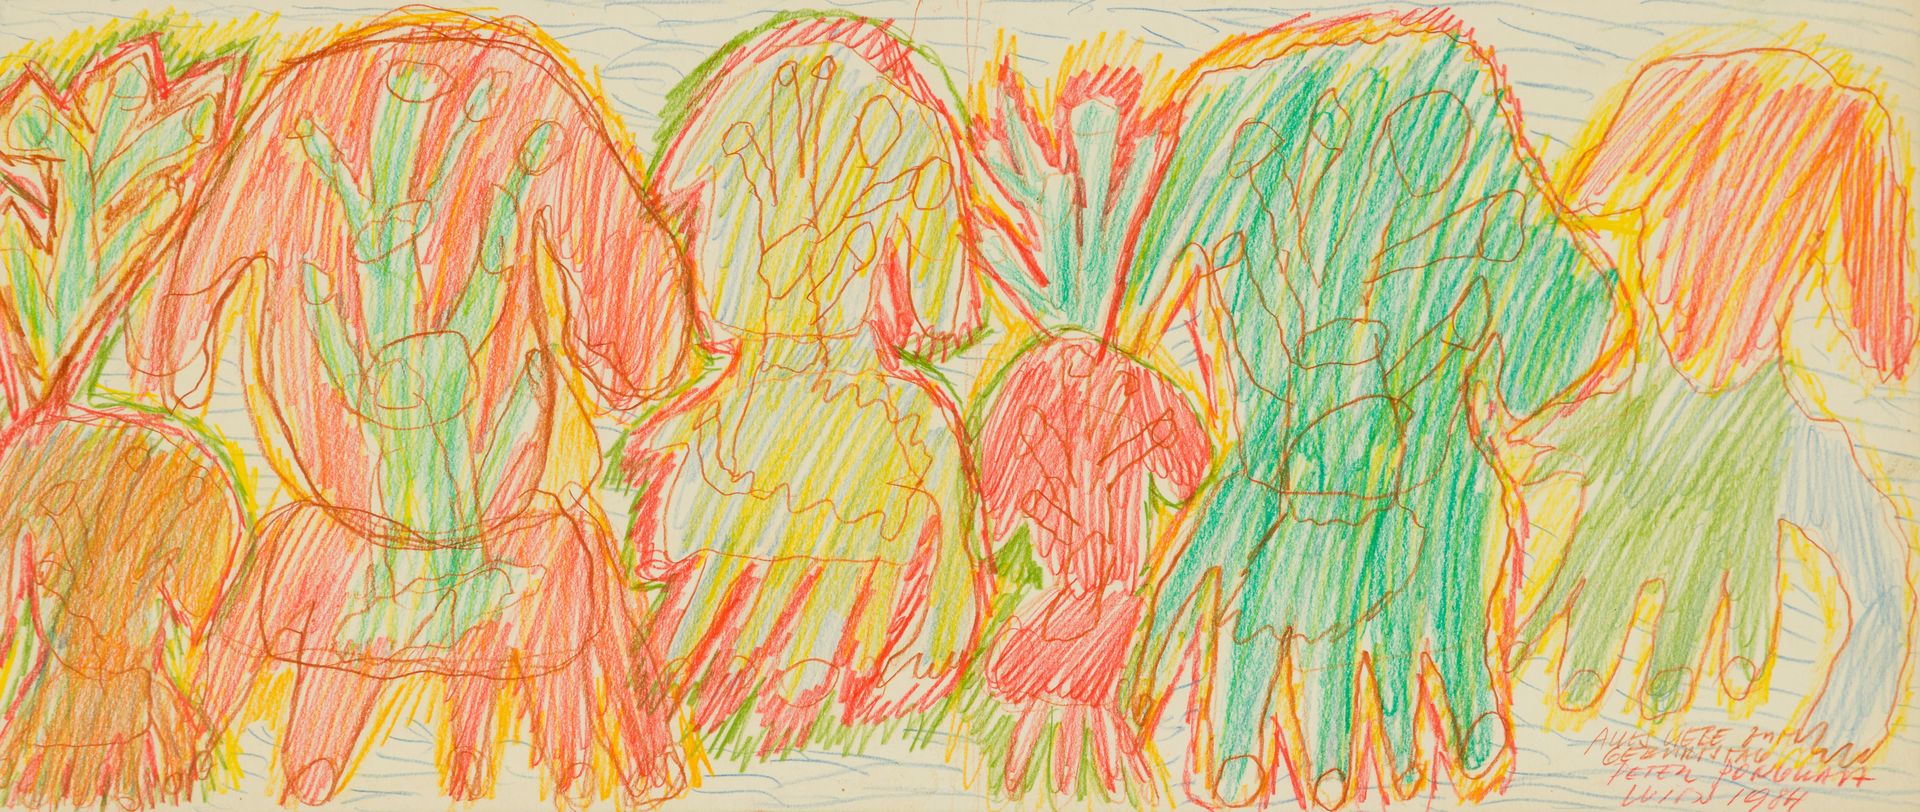 Pongratz, Peter Untitled, 1984
Colored pencil on paper
Signed, dated and with de&hellip;